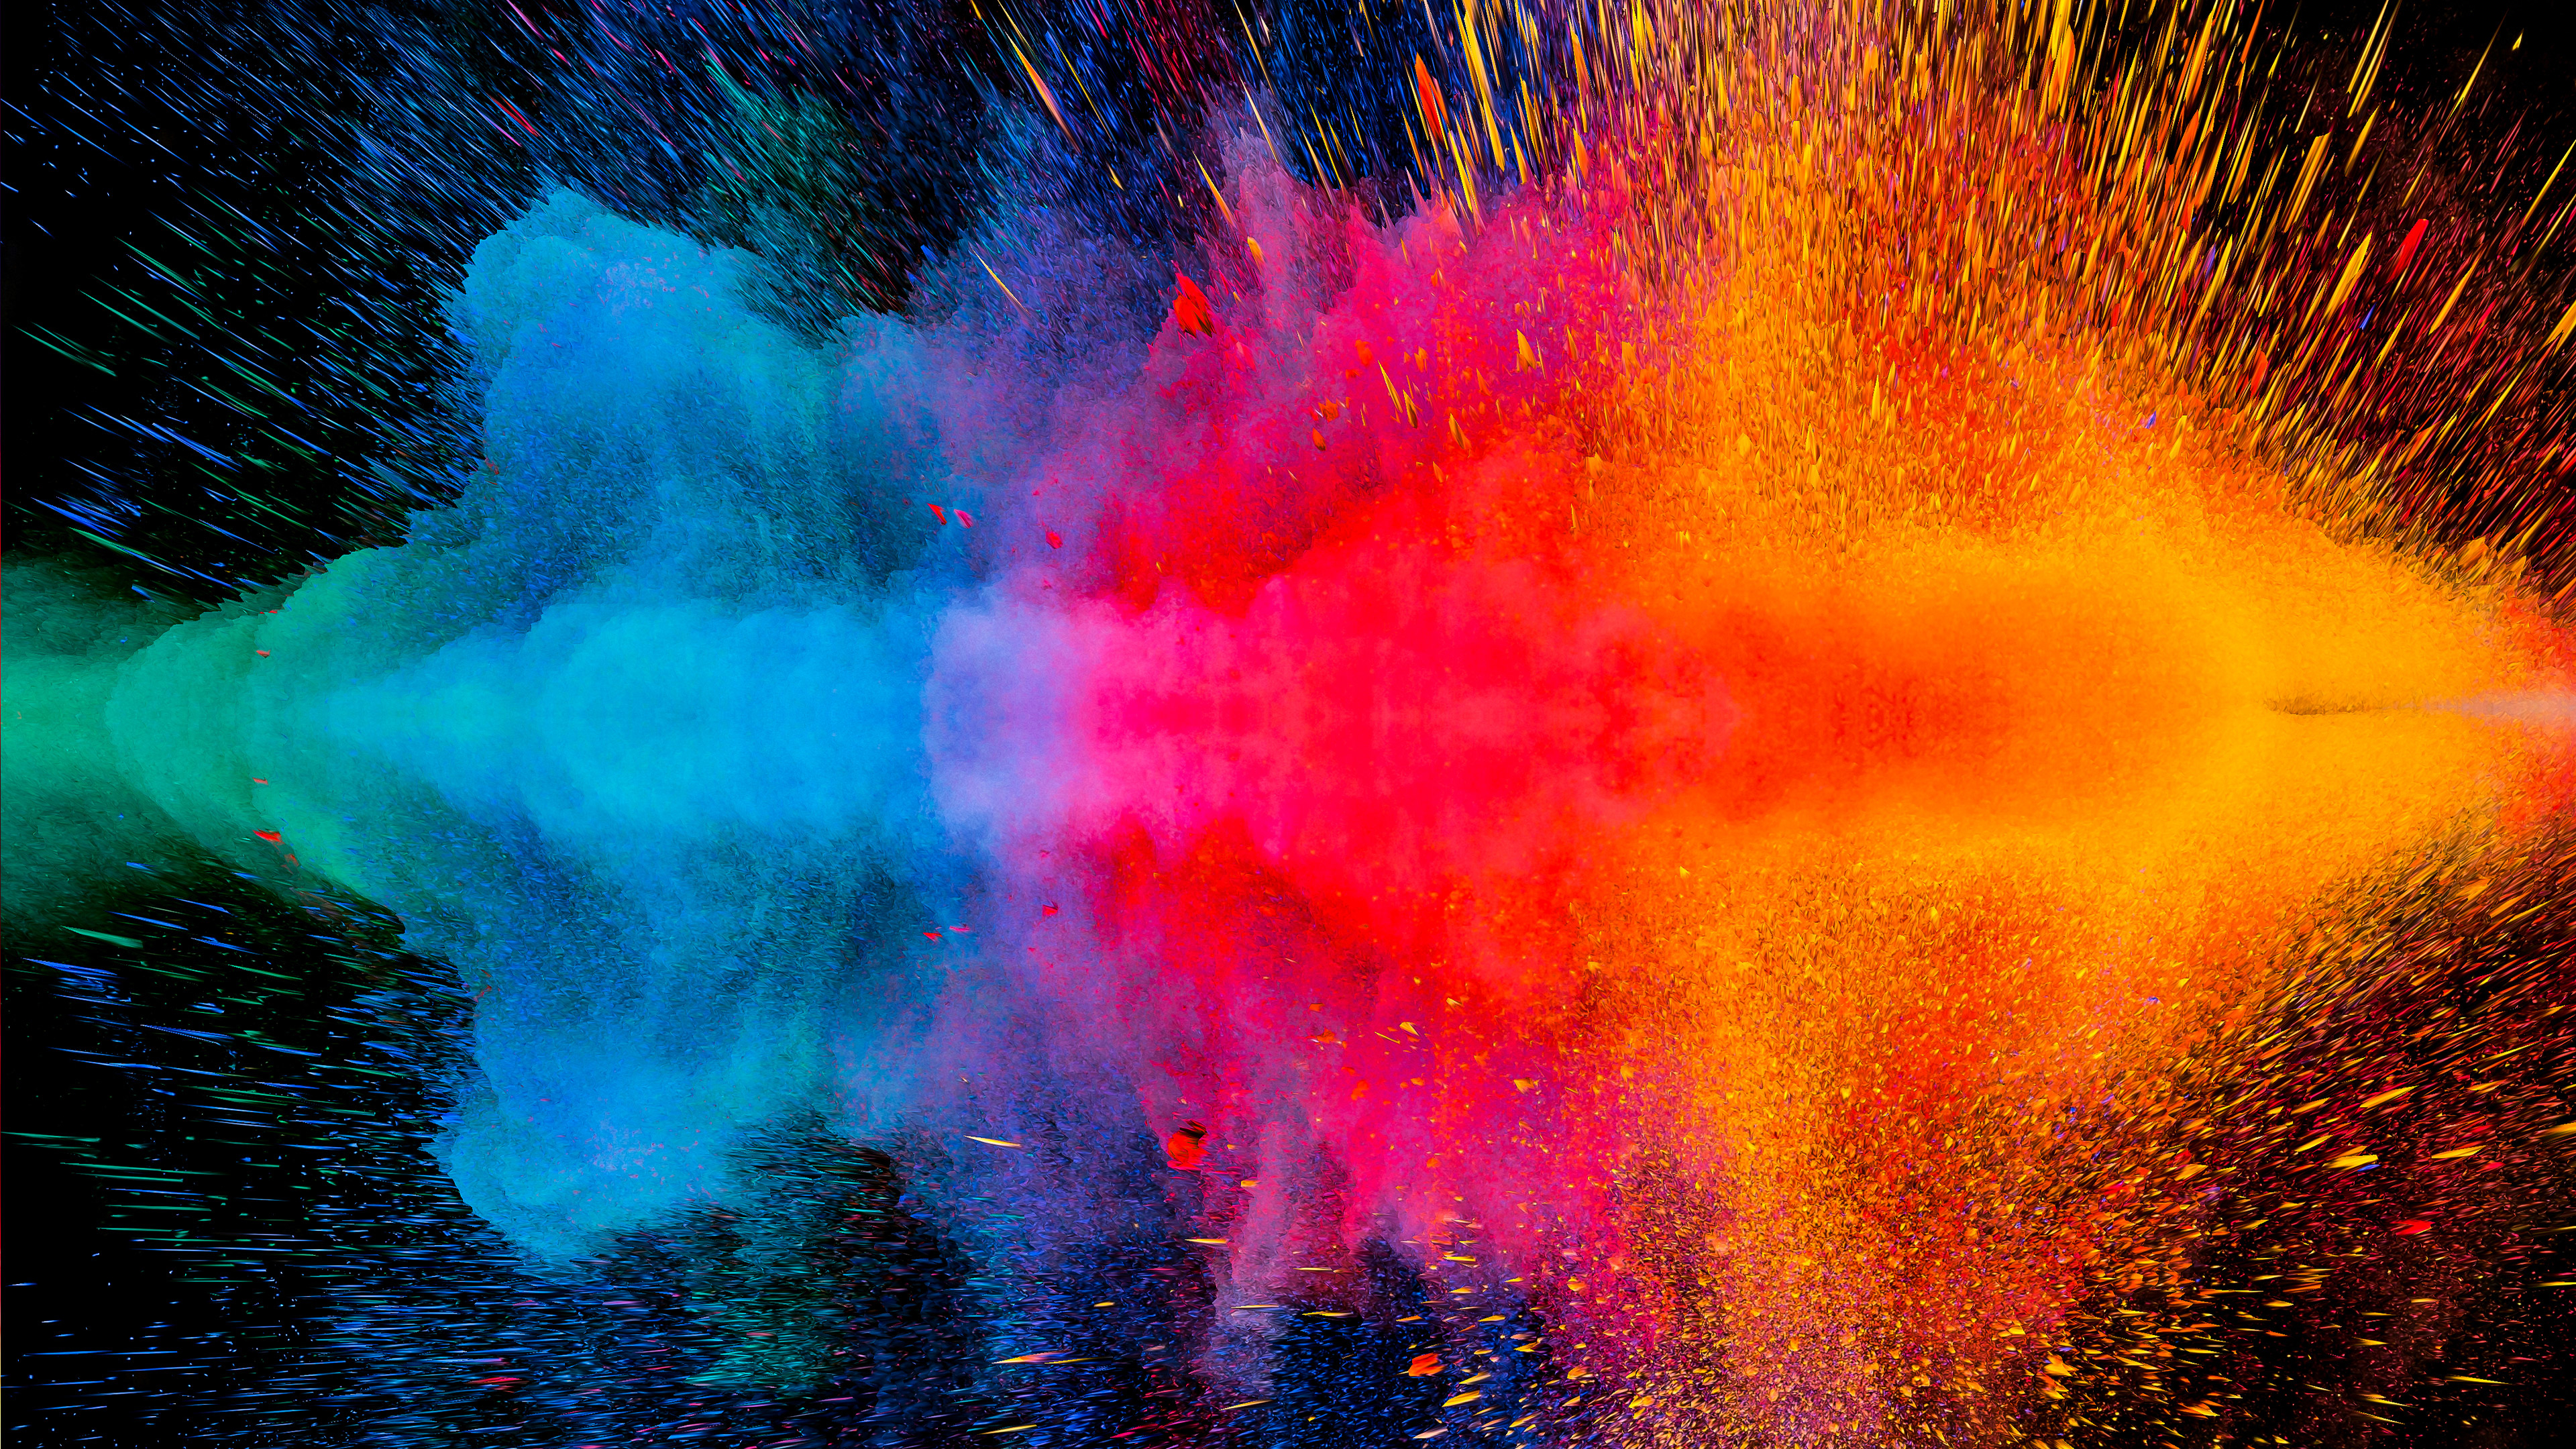  Colorful  Dispersion 4K  Wallpaper  HD Abstract 4K  